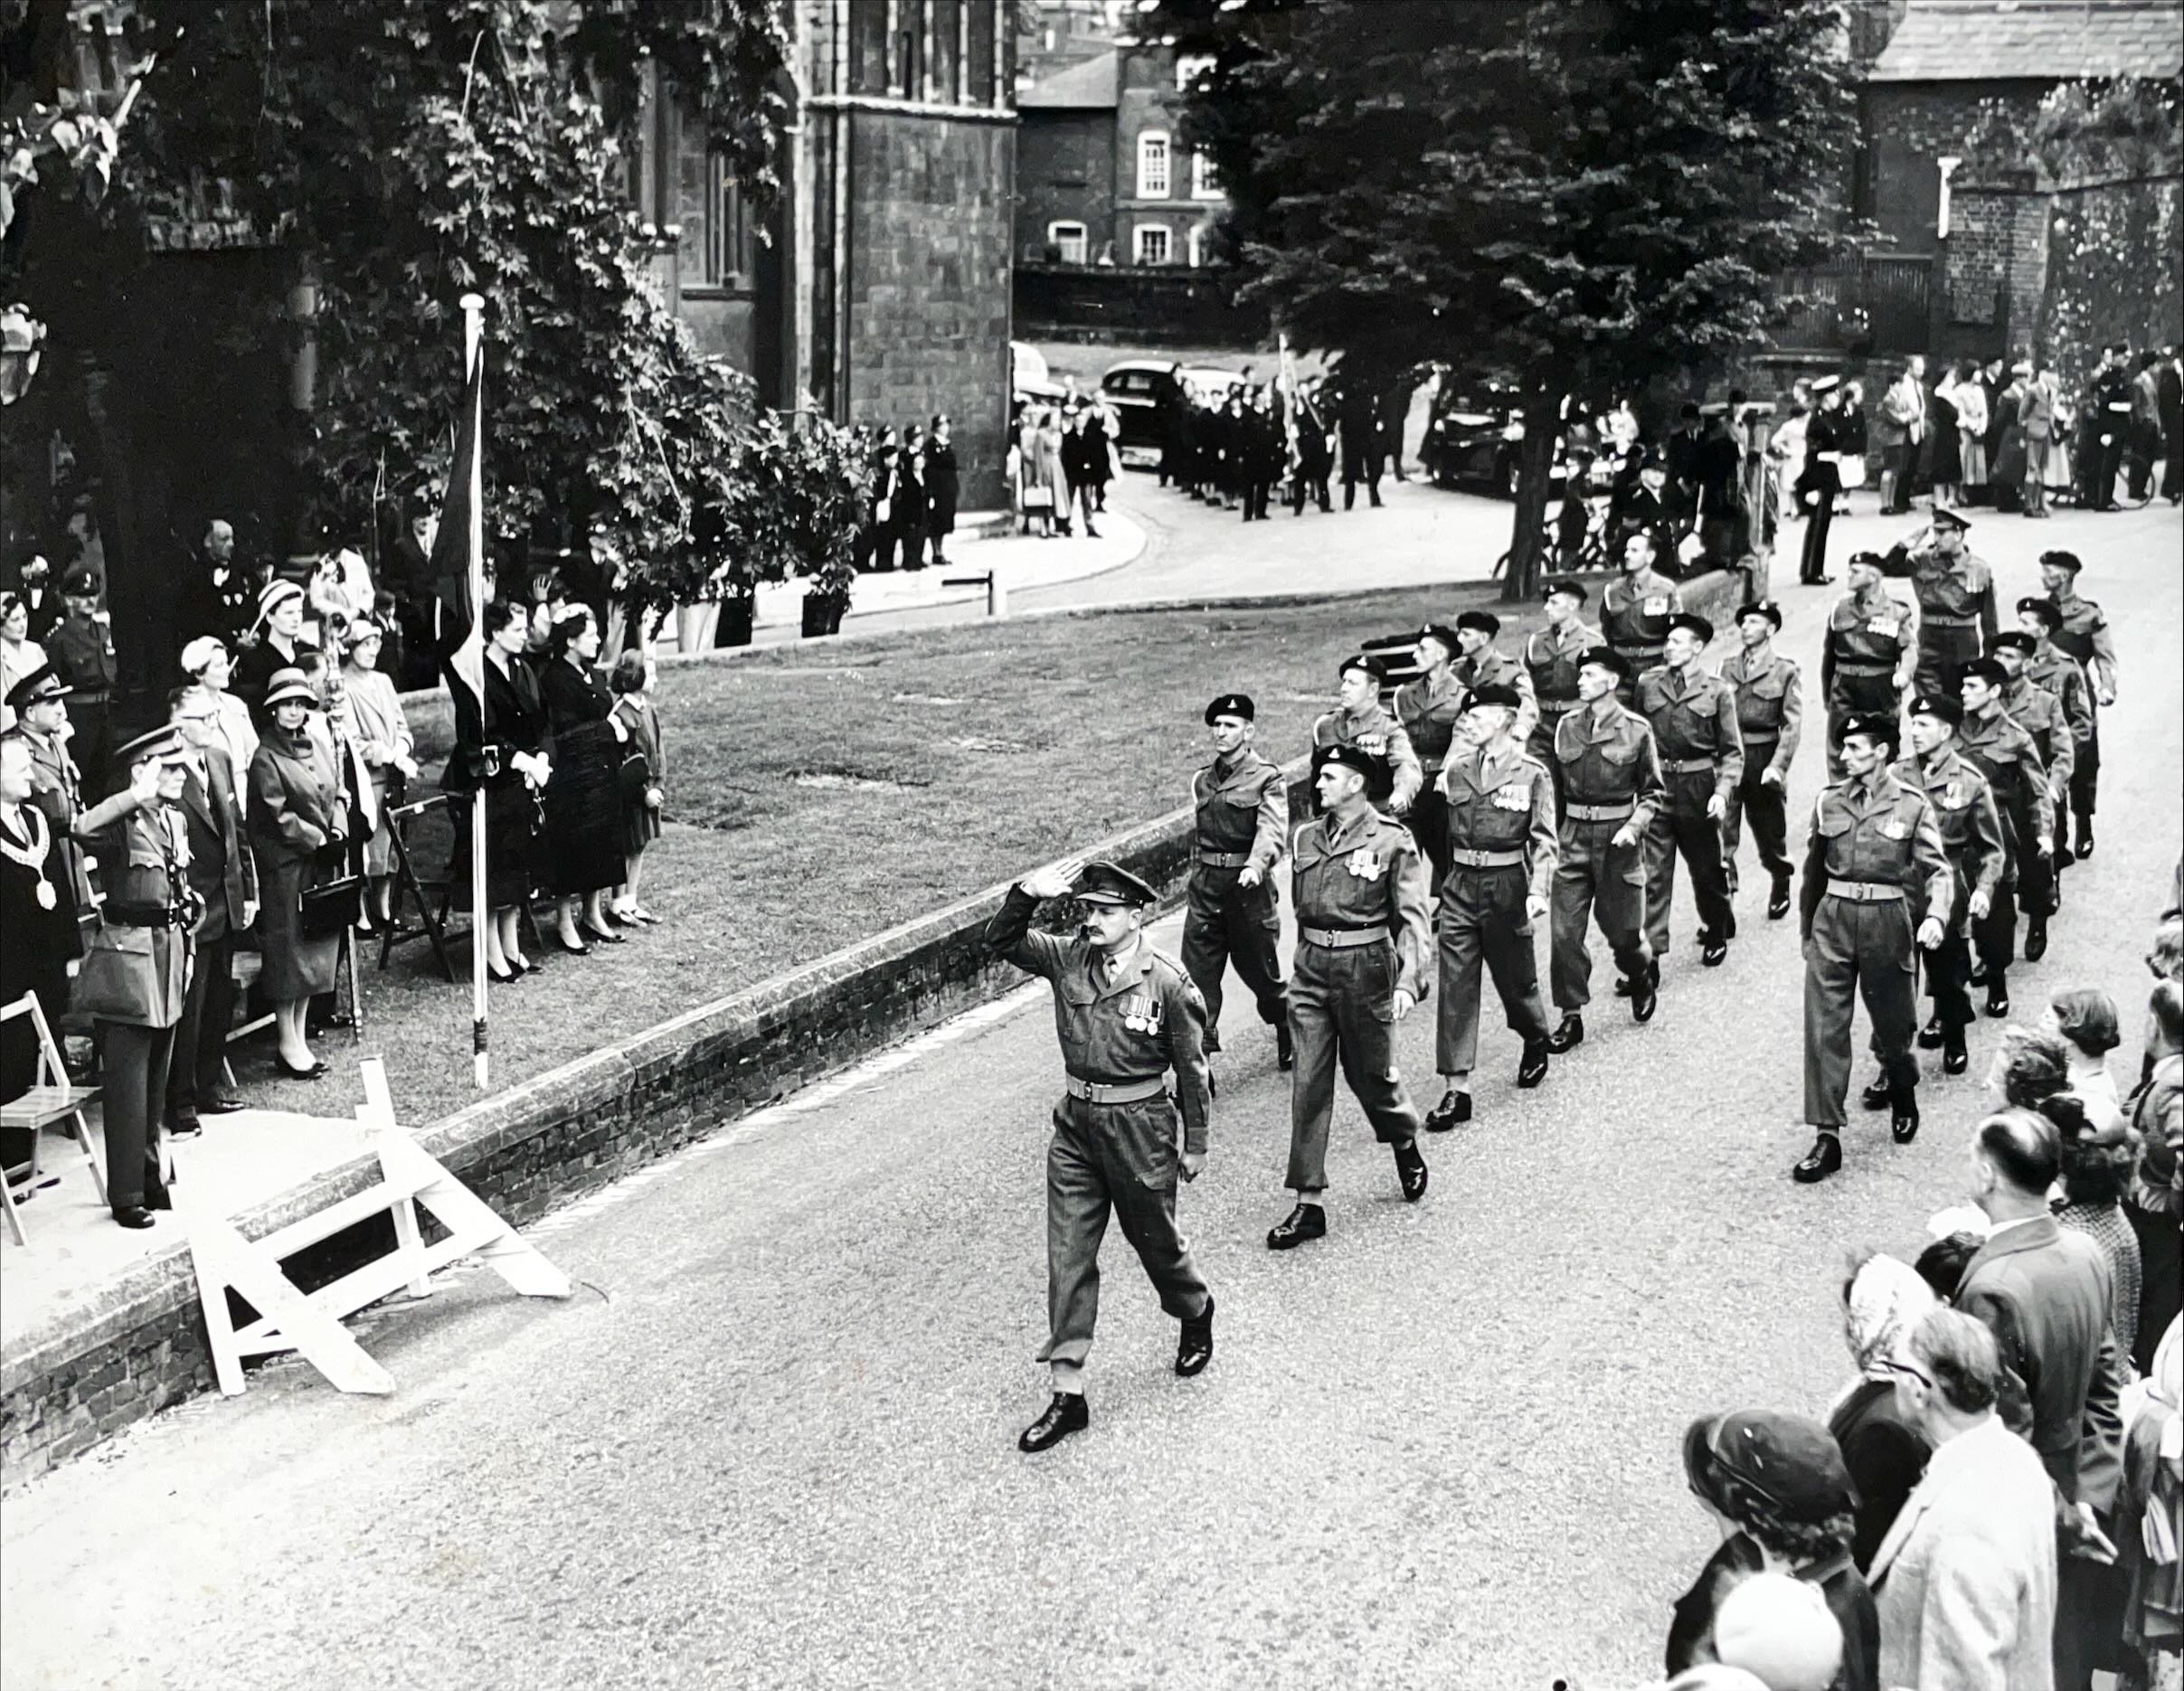 General Norman taking the salute at the TA march past, July 1958